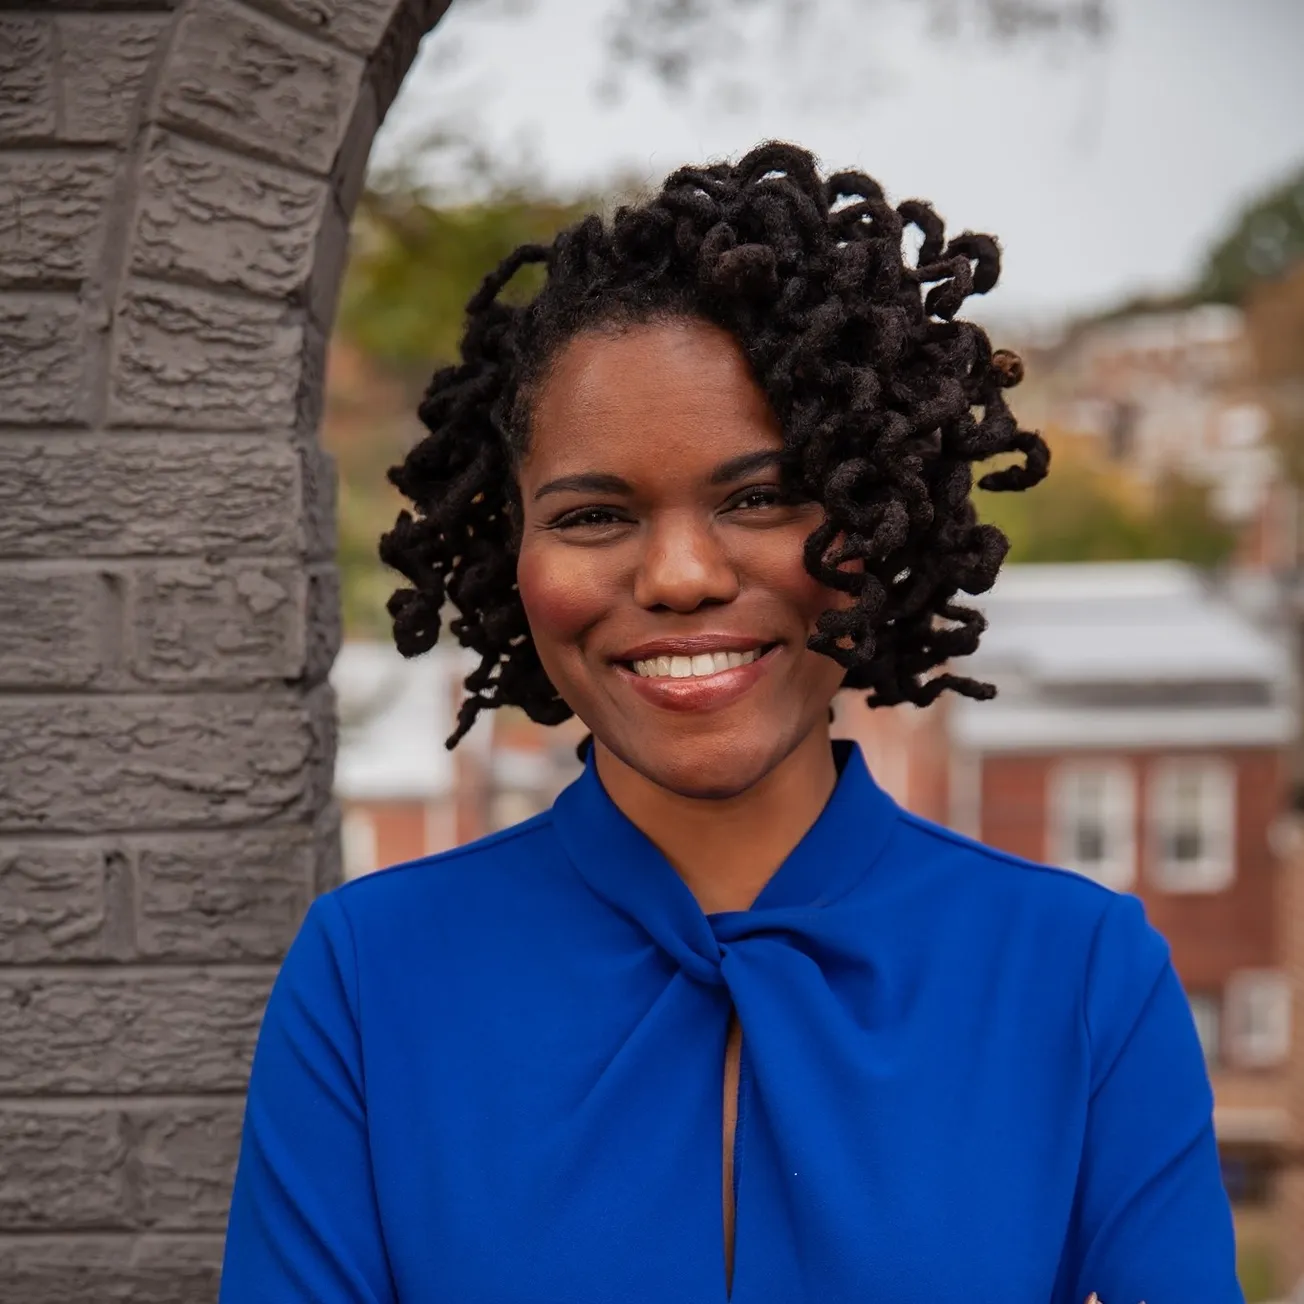 Jeanné Lewis named permanent CEO of Faith in Public Life